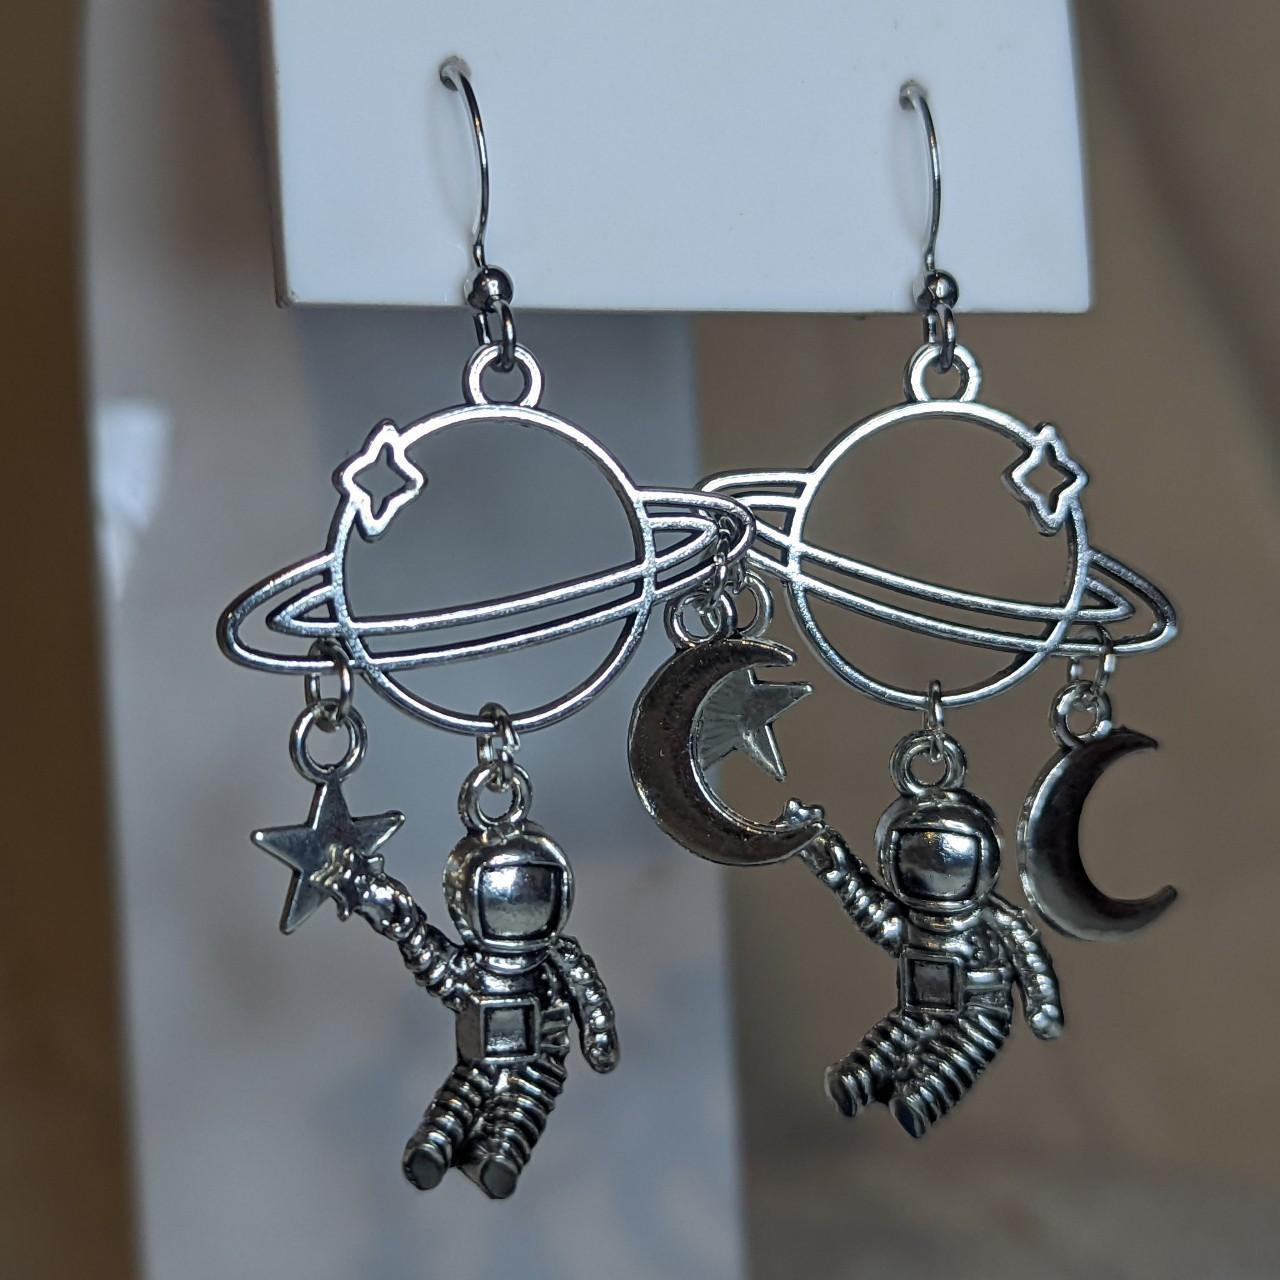 Product Image 1 - Space and astronaut themed earrings.